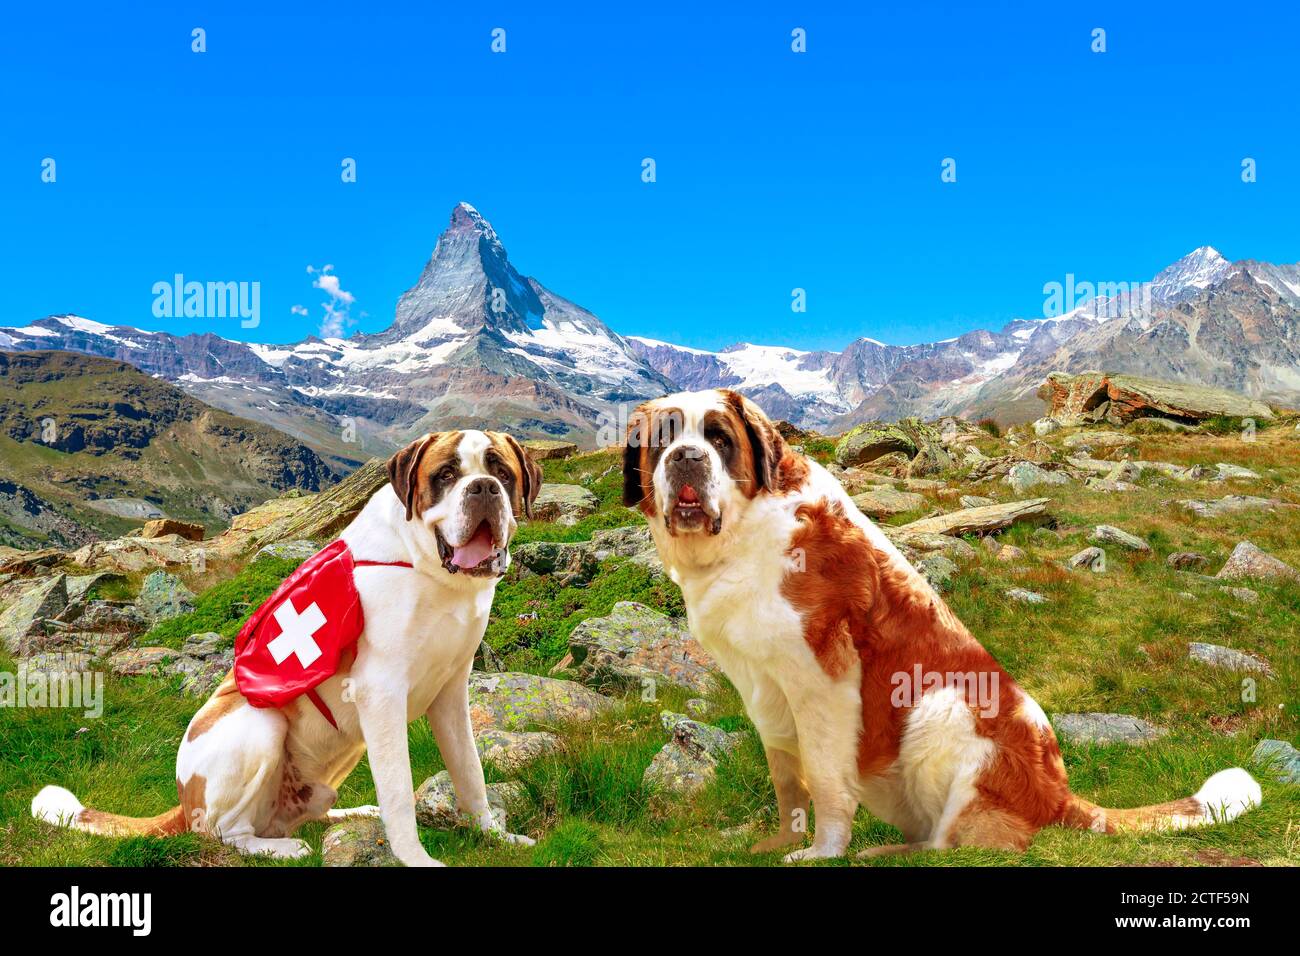 Side view of two St. Bernard rescue dogs standing in Zermatt, Canton of Valais, Switzerland, with Mount Matterhorn or Monte Cervino or Mont Cervin Stock Photo